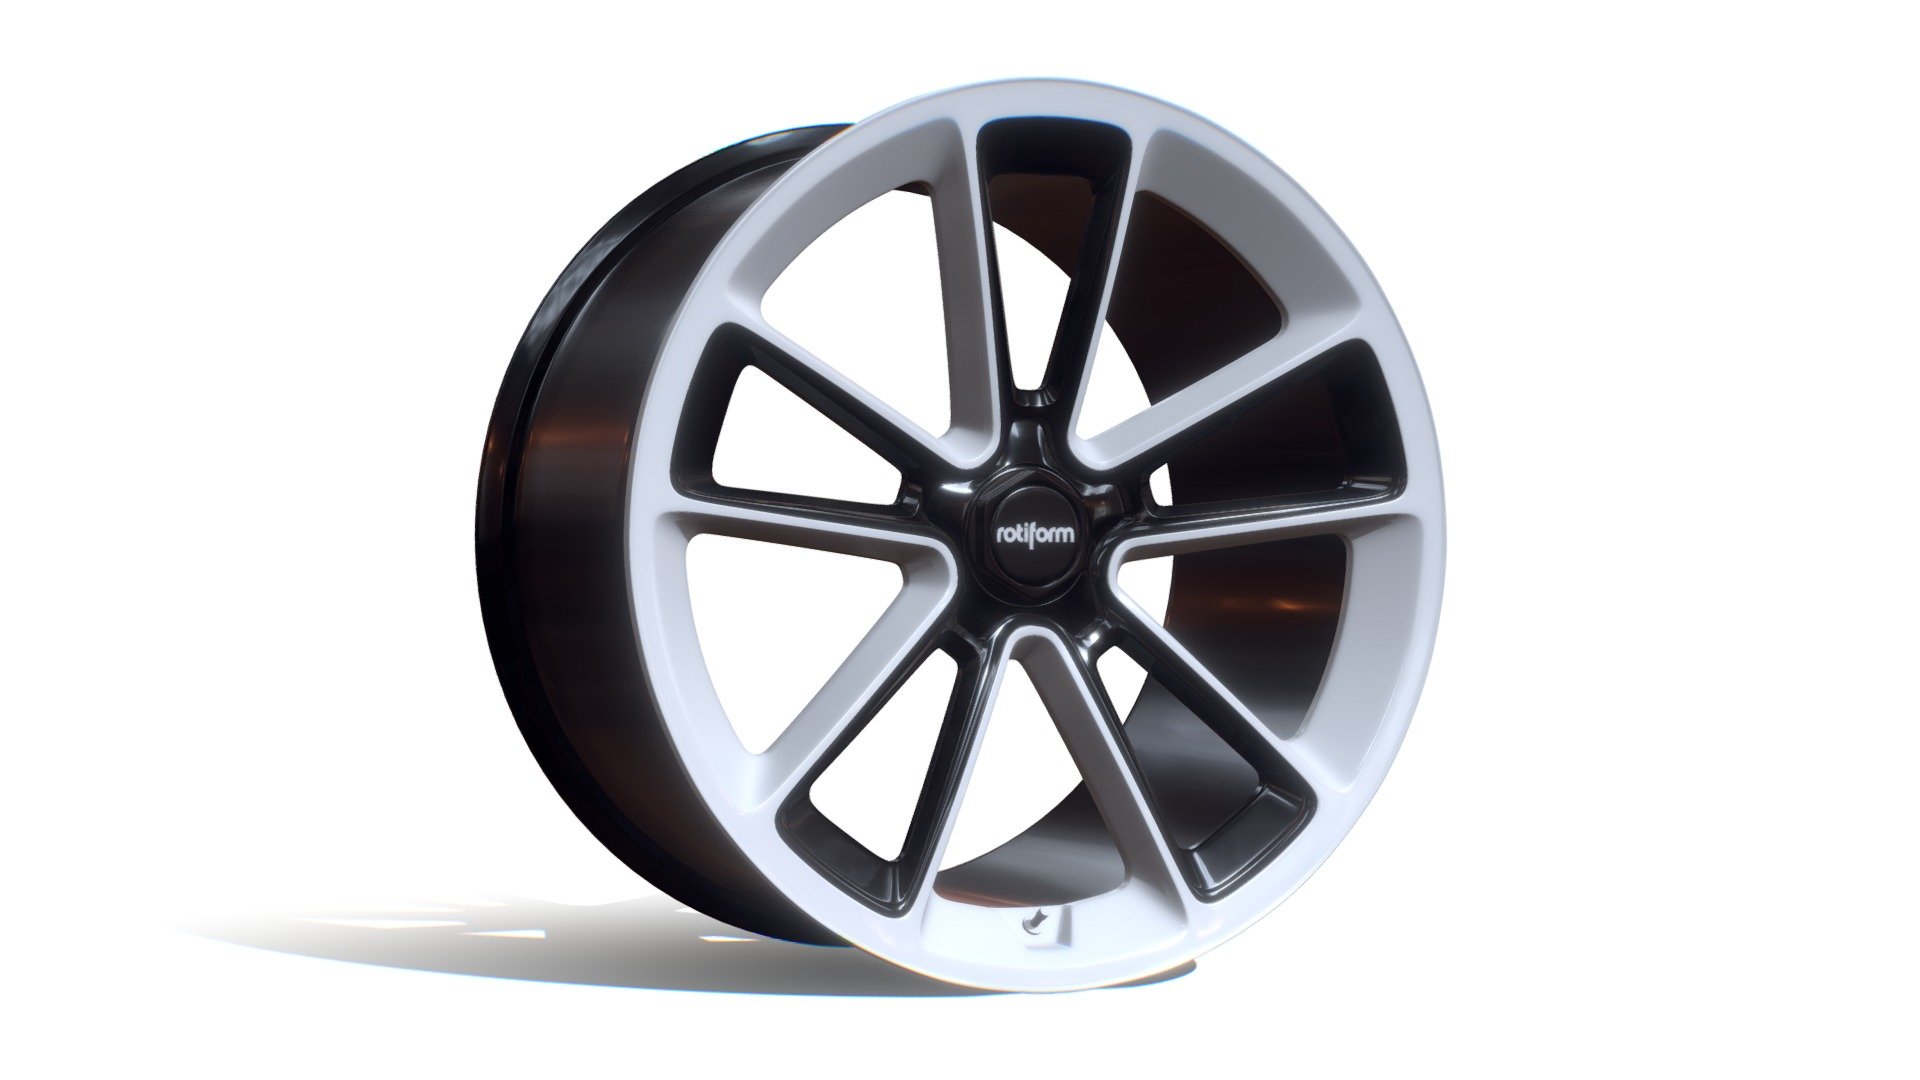 Rotiform BTL wheel made in Blender.

This model may have some small differences compared to real life product.

If you have any questions or problems with the model, please contact me - Rotiform BTL - Buy Royalty Free 3D model by yokatann 3d model